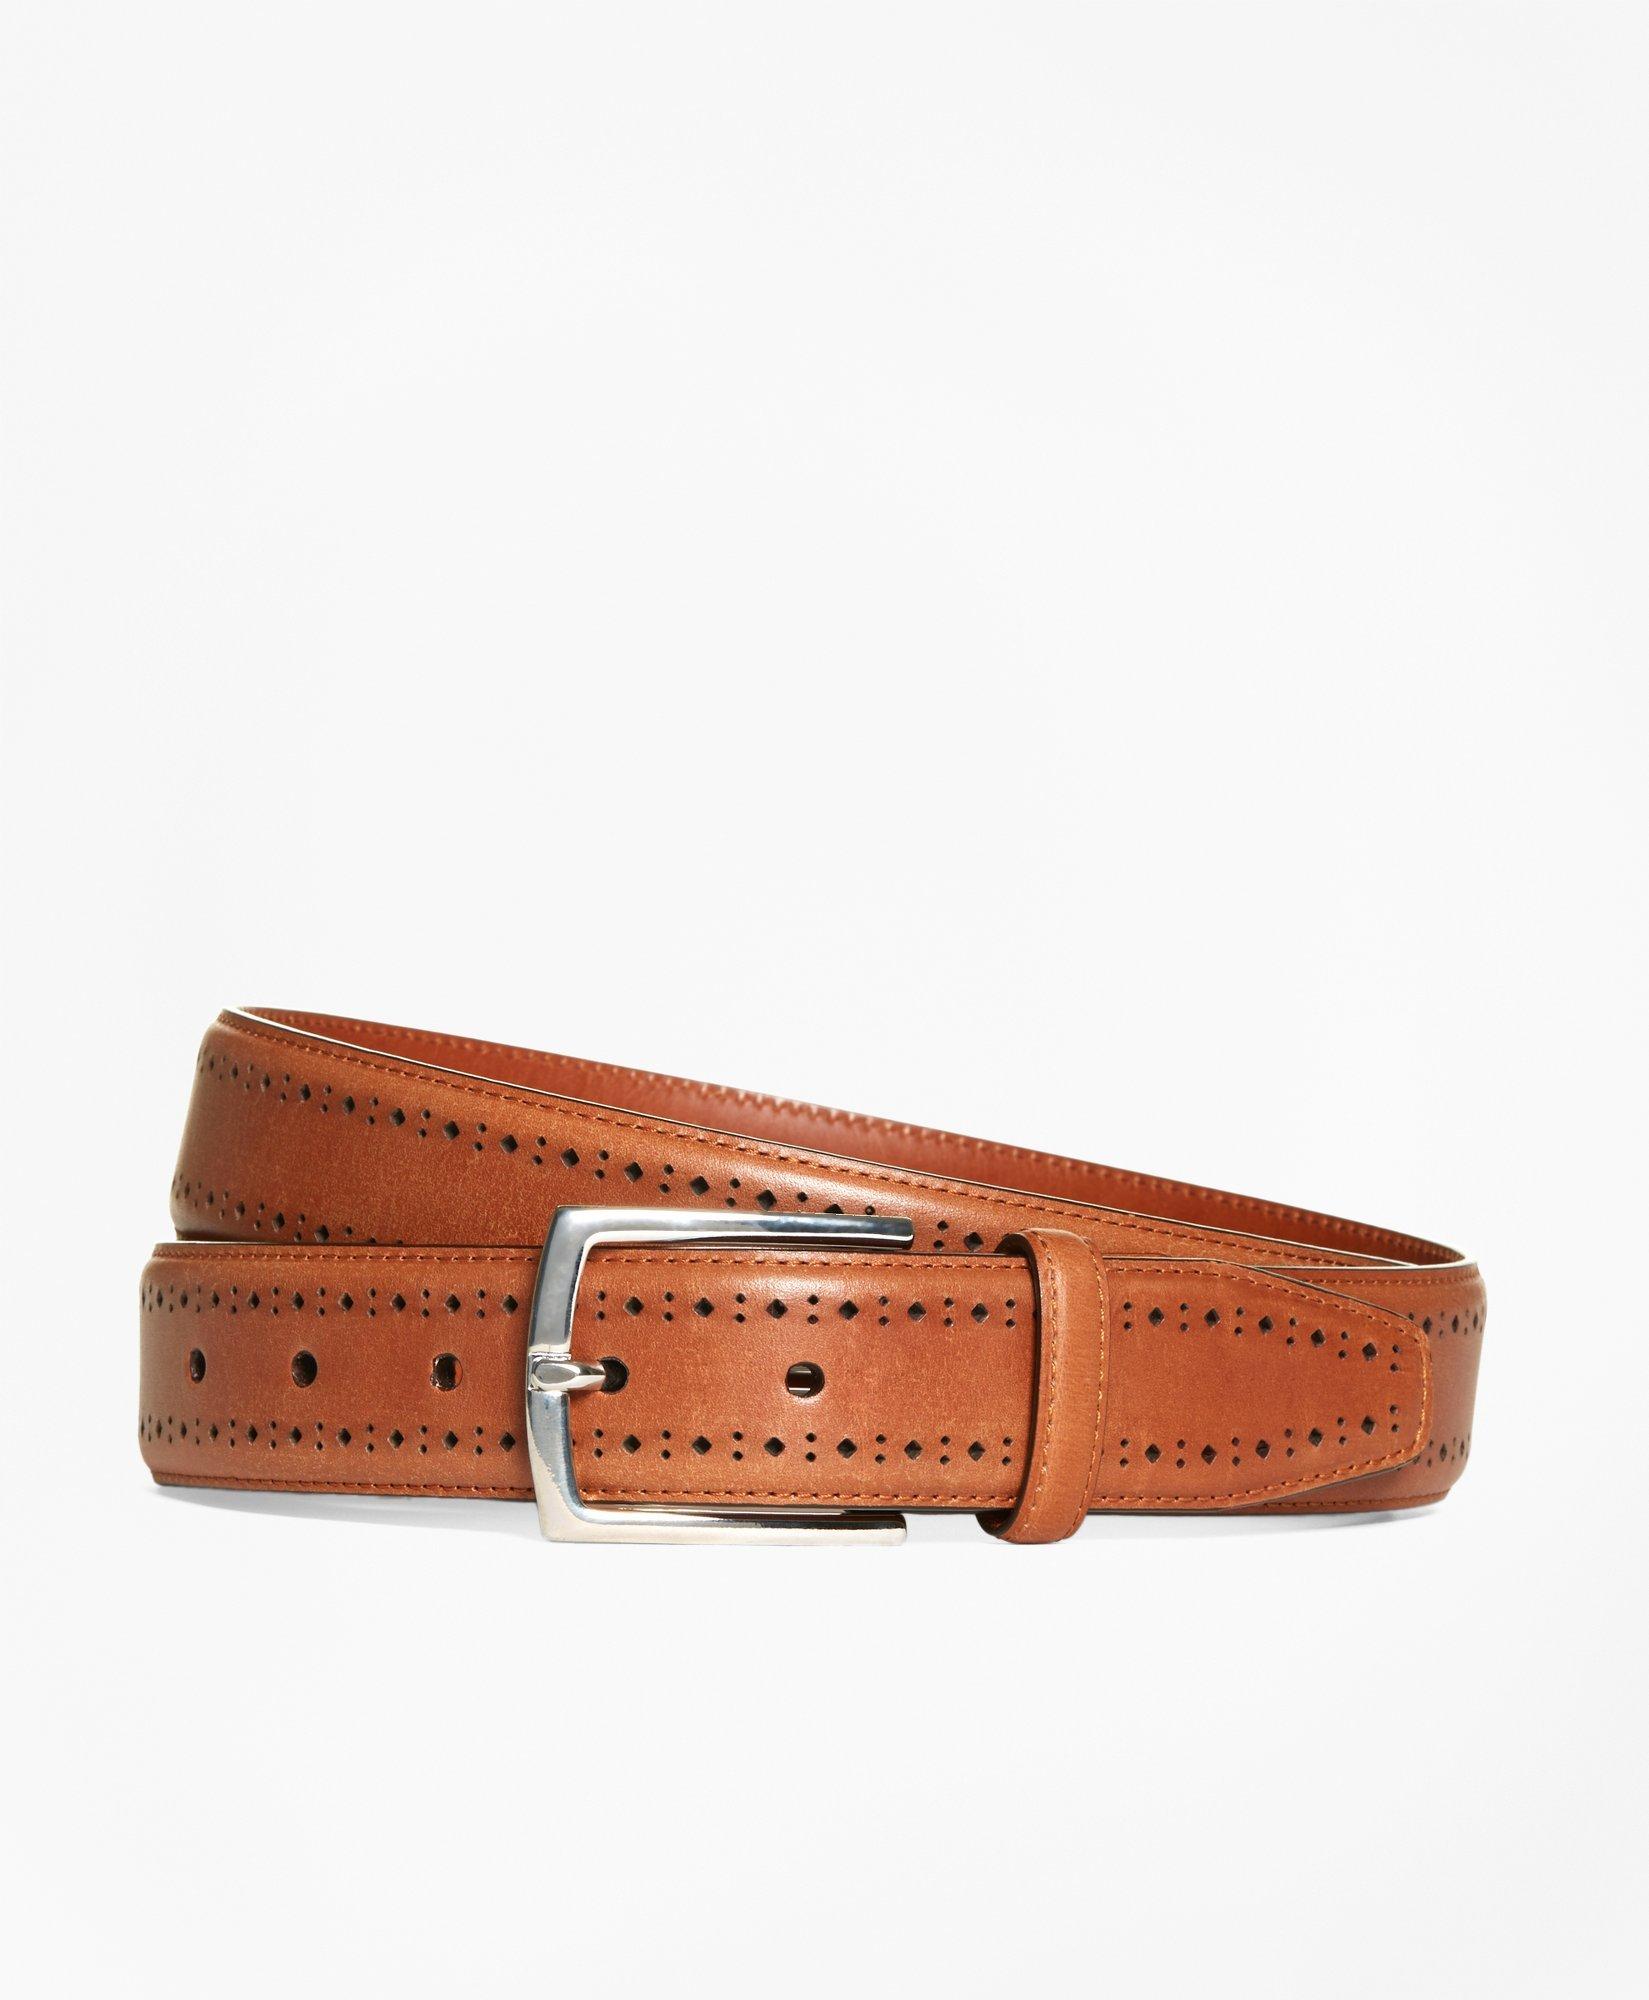 Stretchable Leather Belts